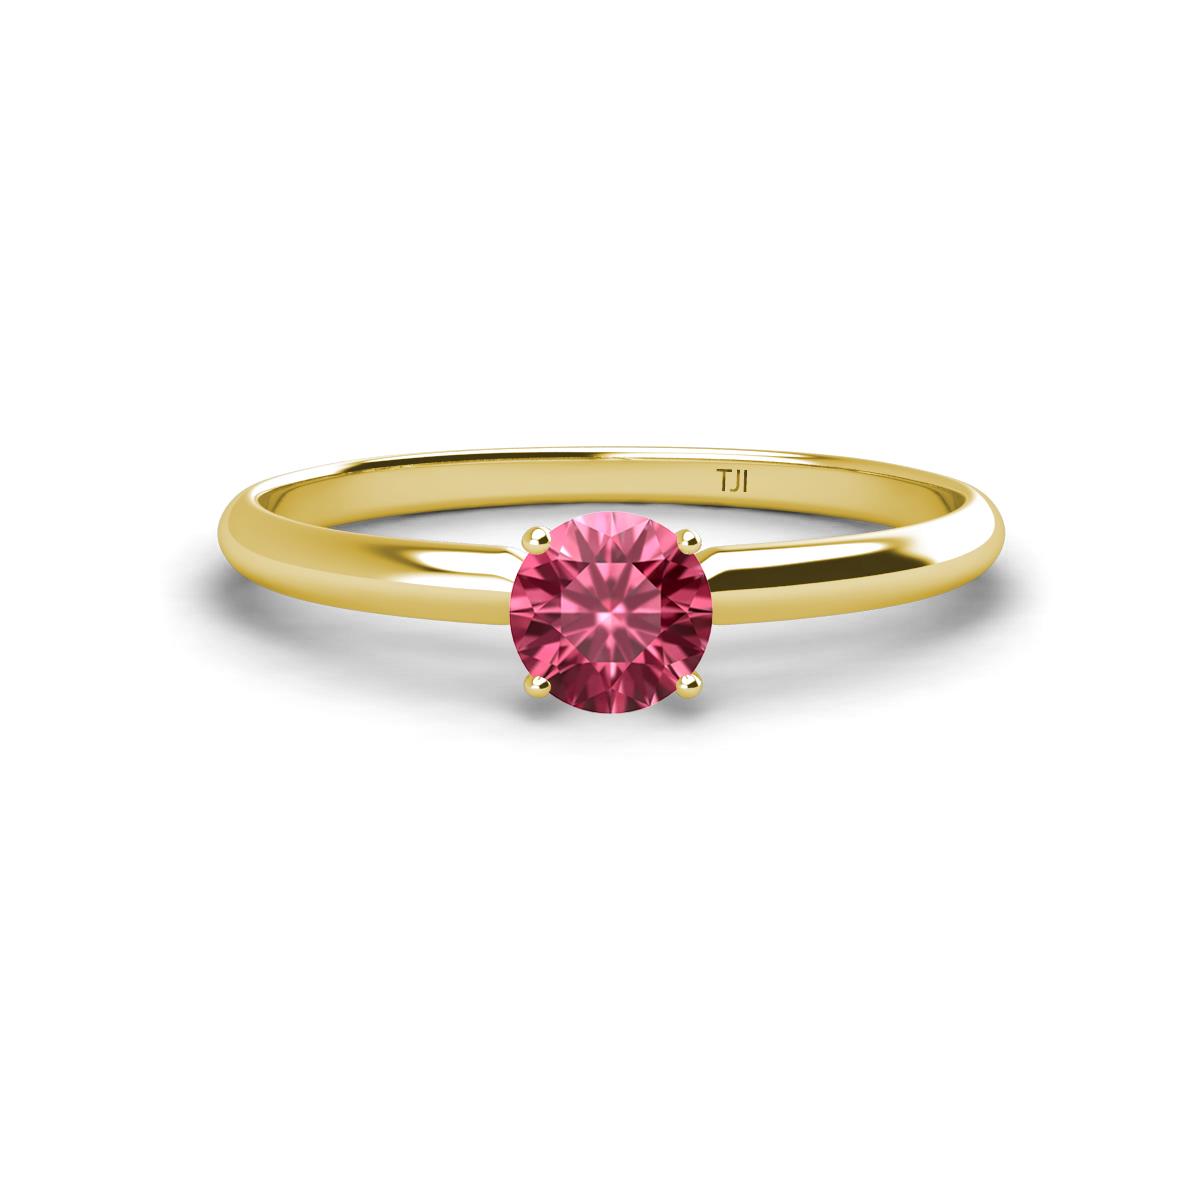 Solus Round Pink Tourmaline Solitaire Engagement Ring  